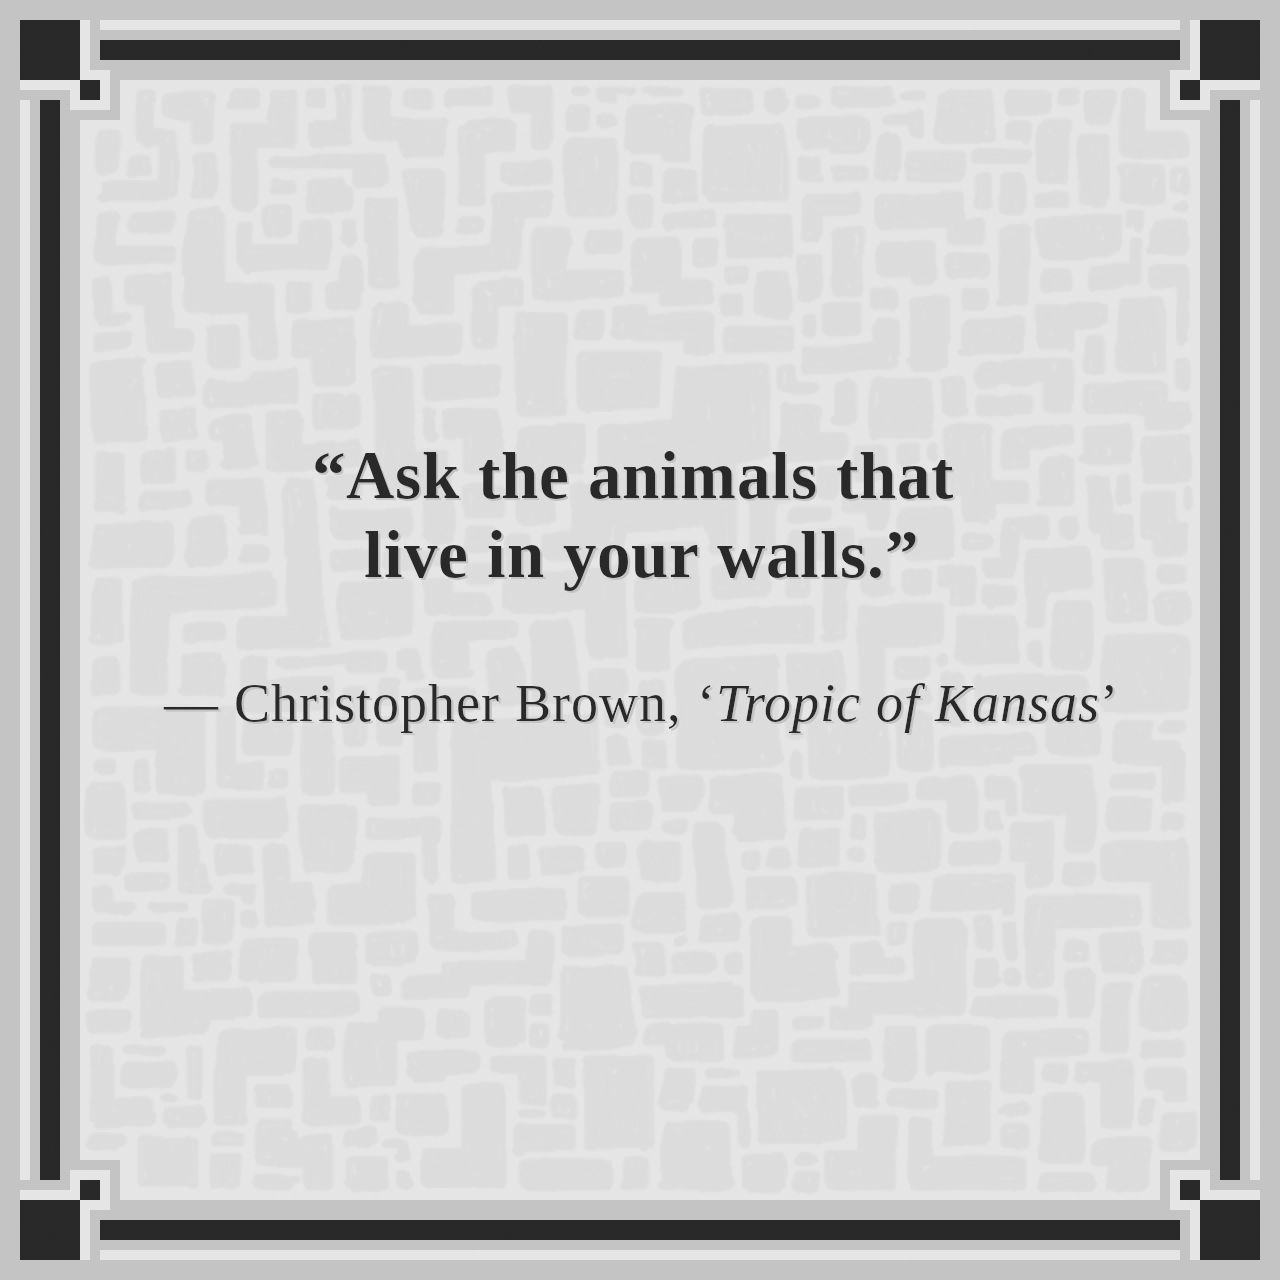 “Ask the animals that live in your walls.”

— Christopher Brown, ‘Tropic of Kansas’